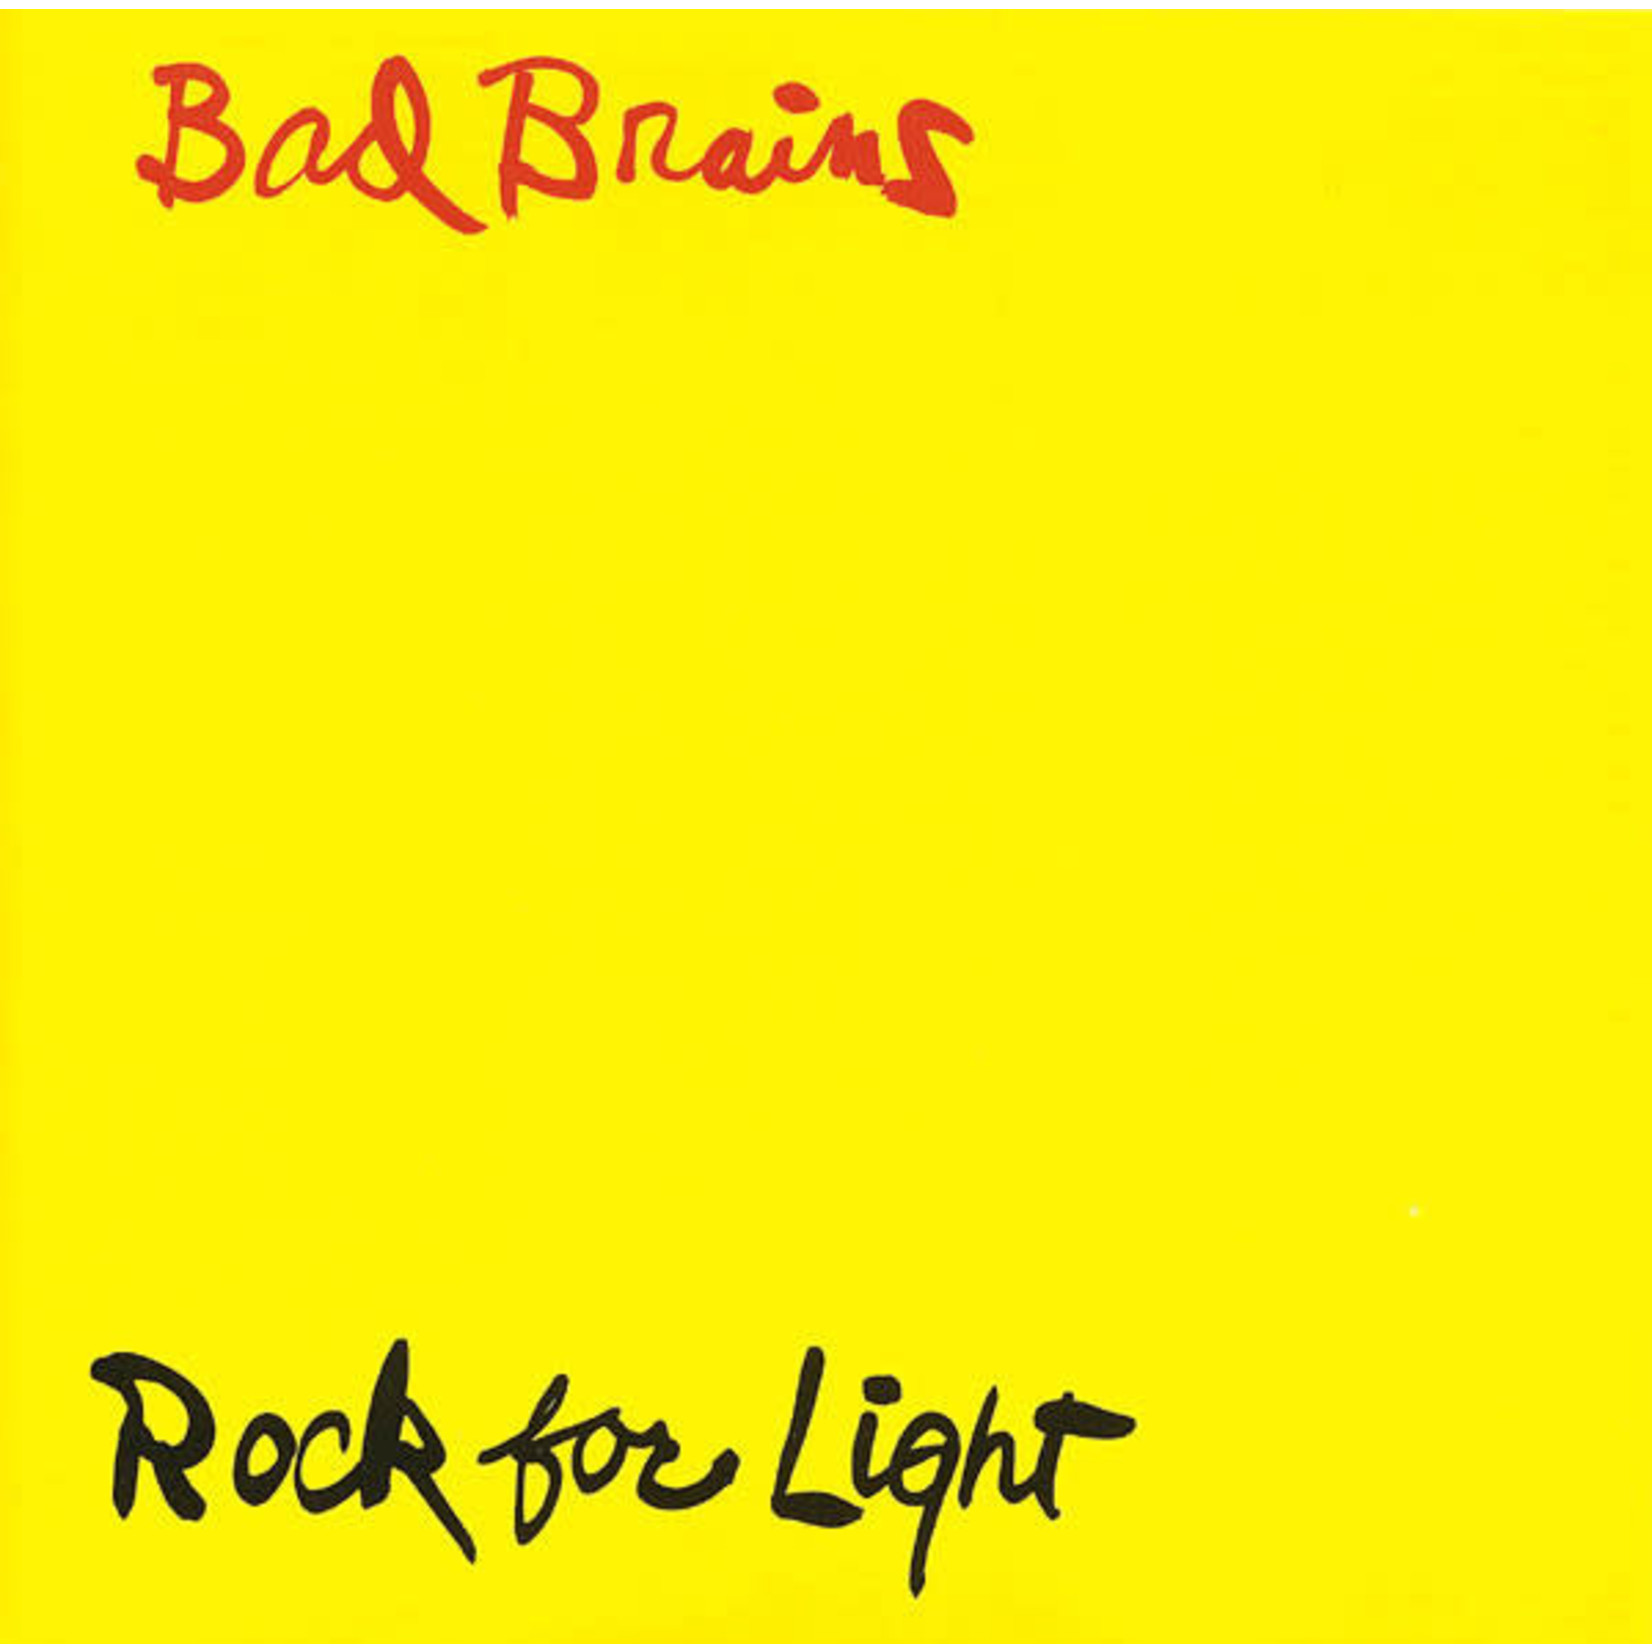 [New] Bad Brains - Rock For Light (indie exclusive yellow vinyl)